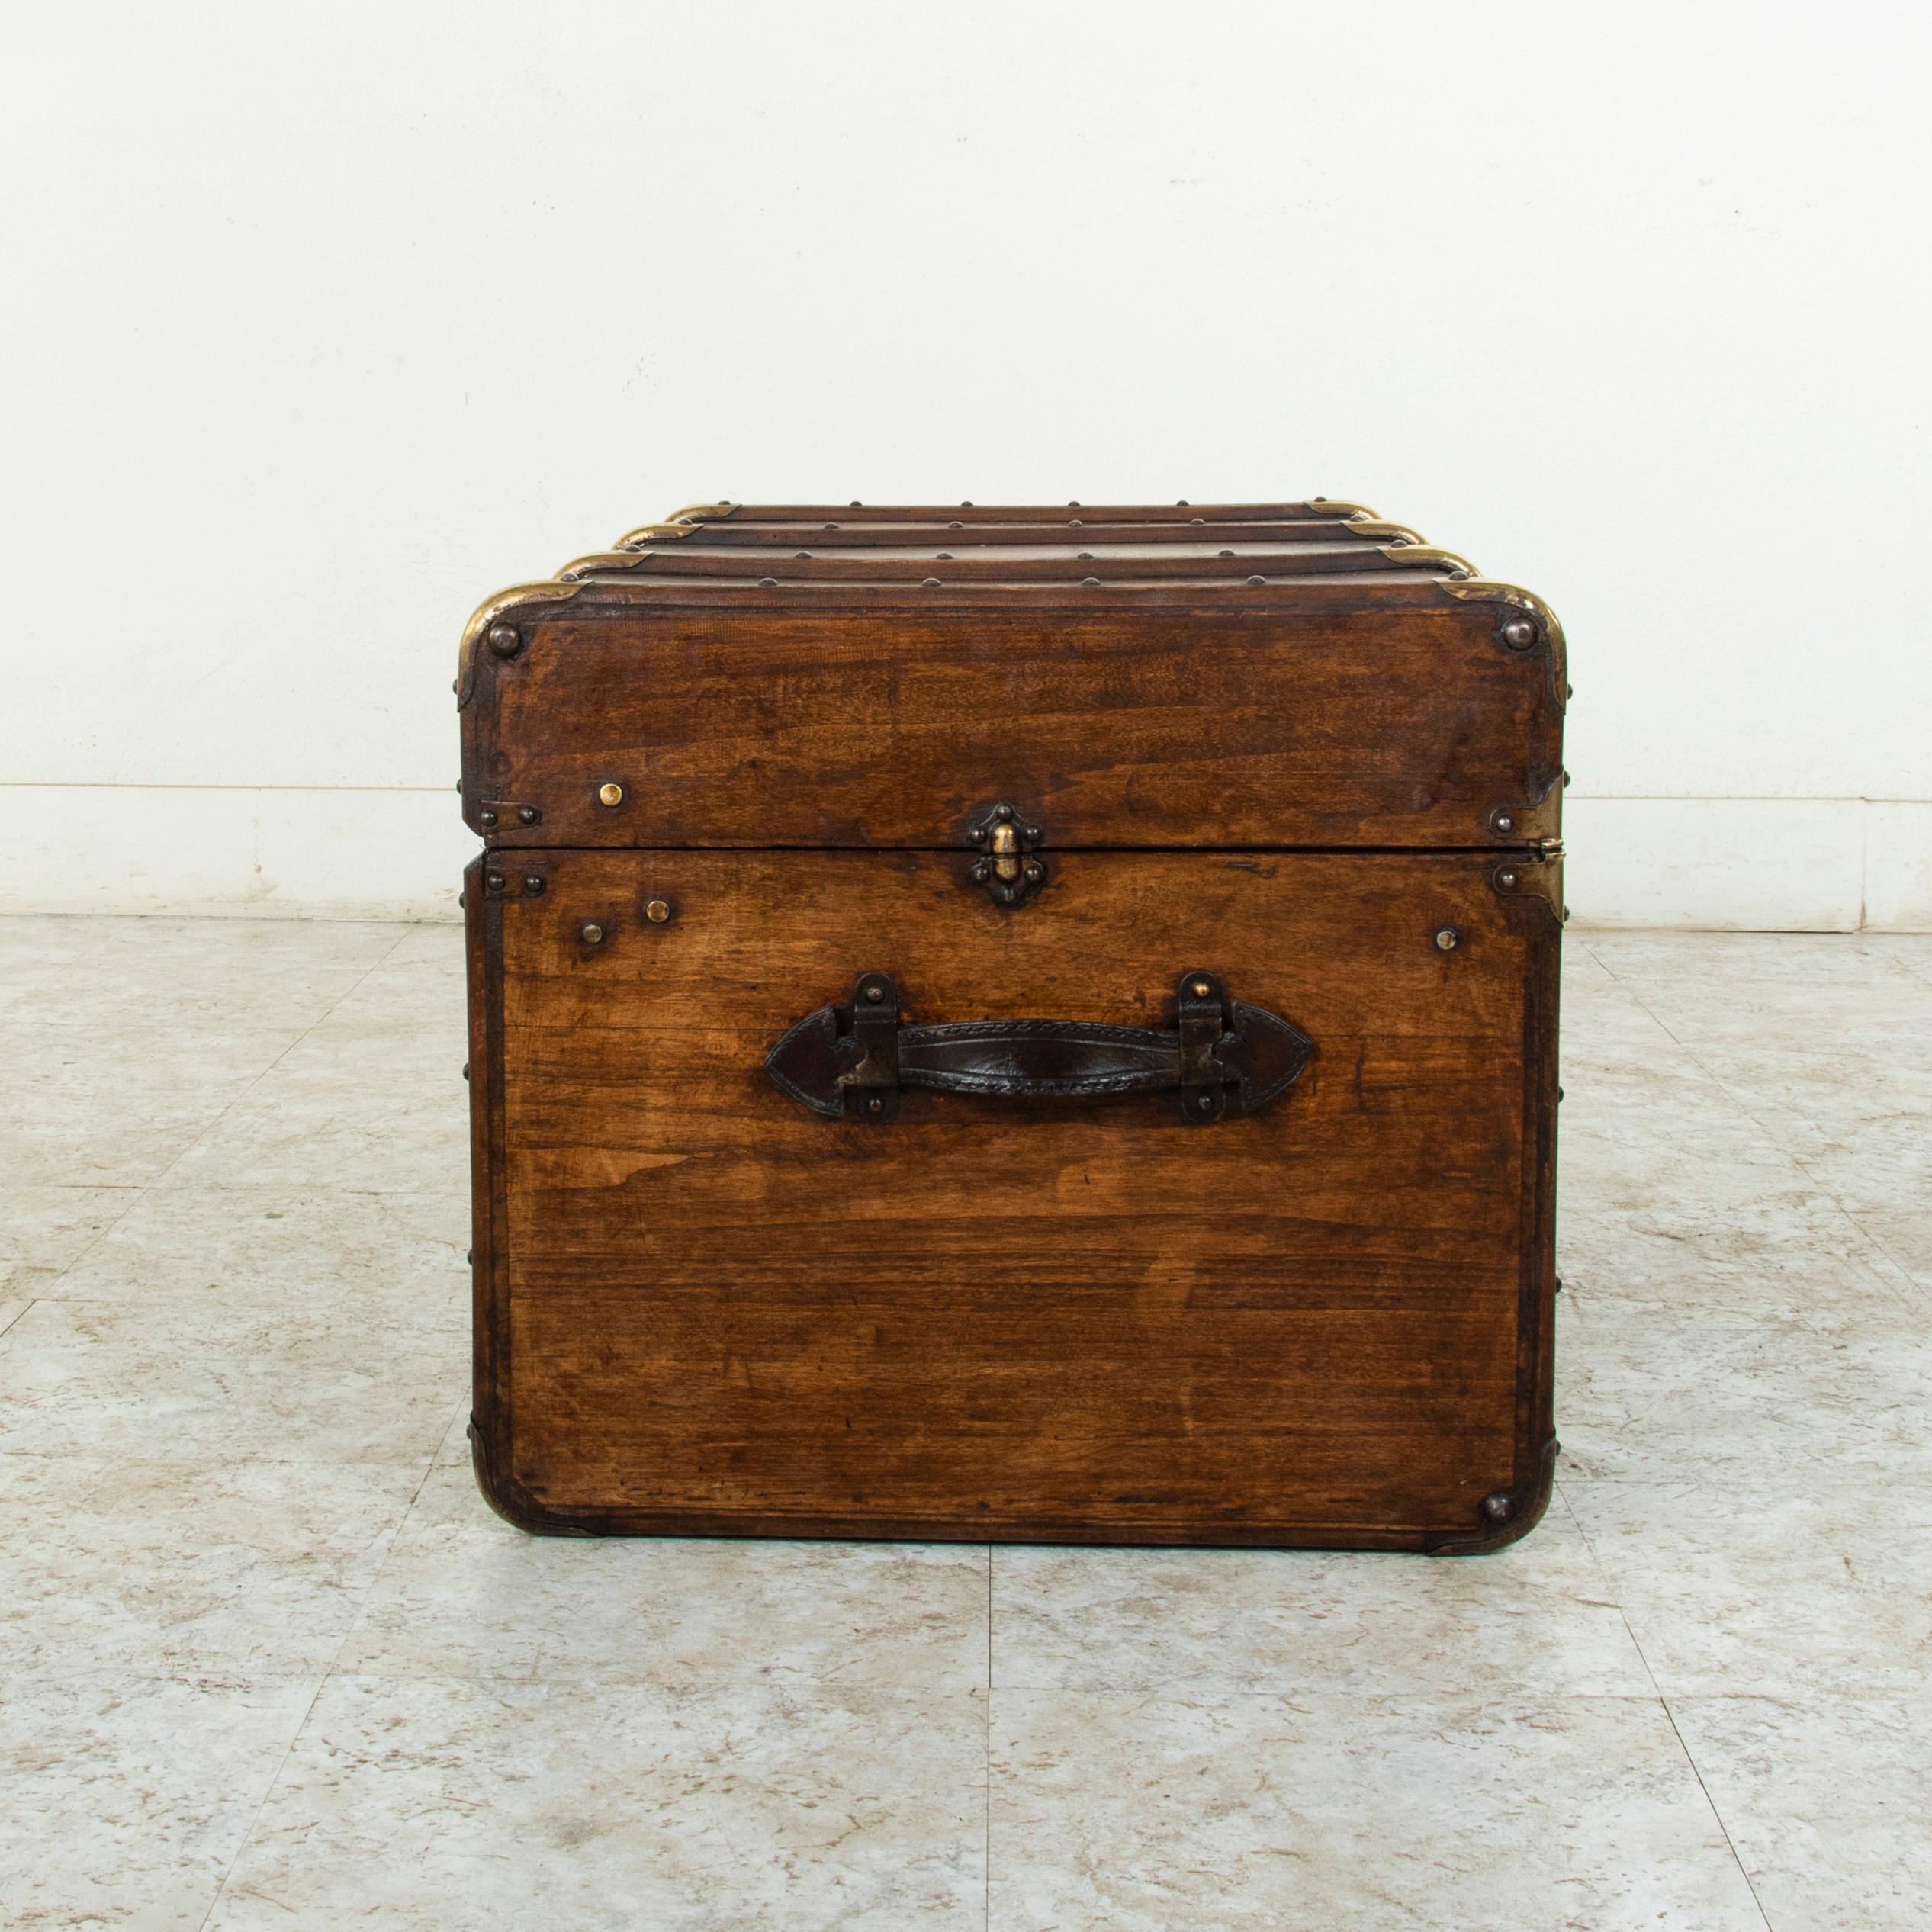 Early 20th Century French Beechwood Trunk with Runners Brass Detailing and Leather Handles